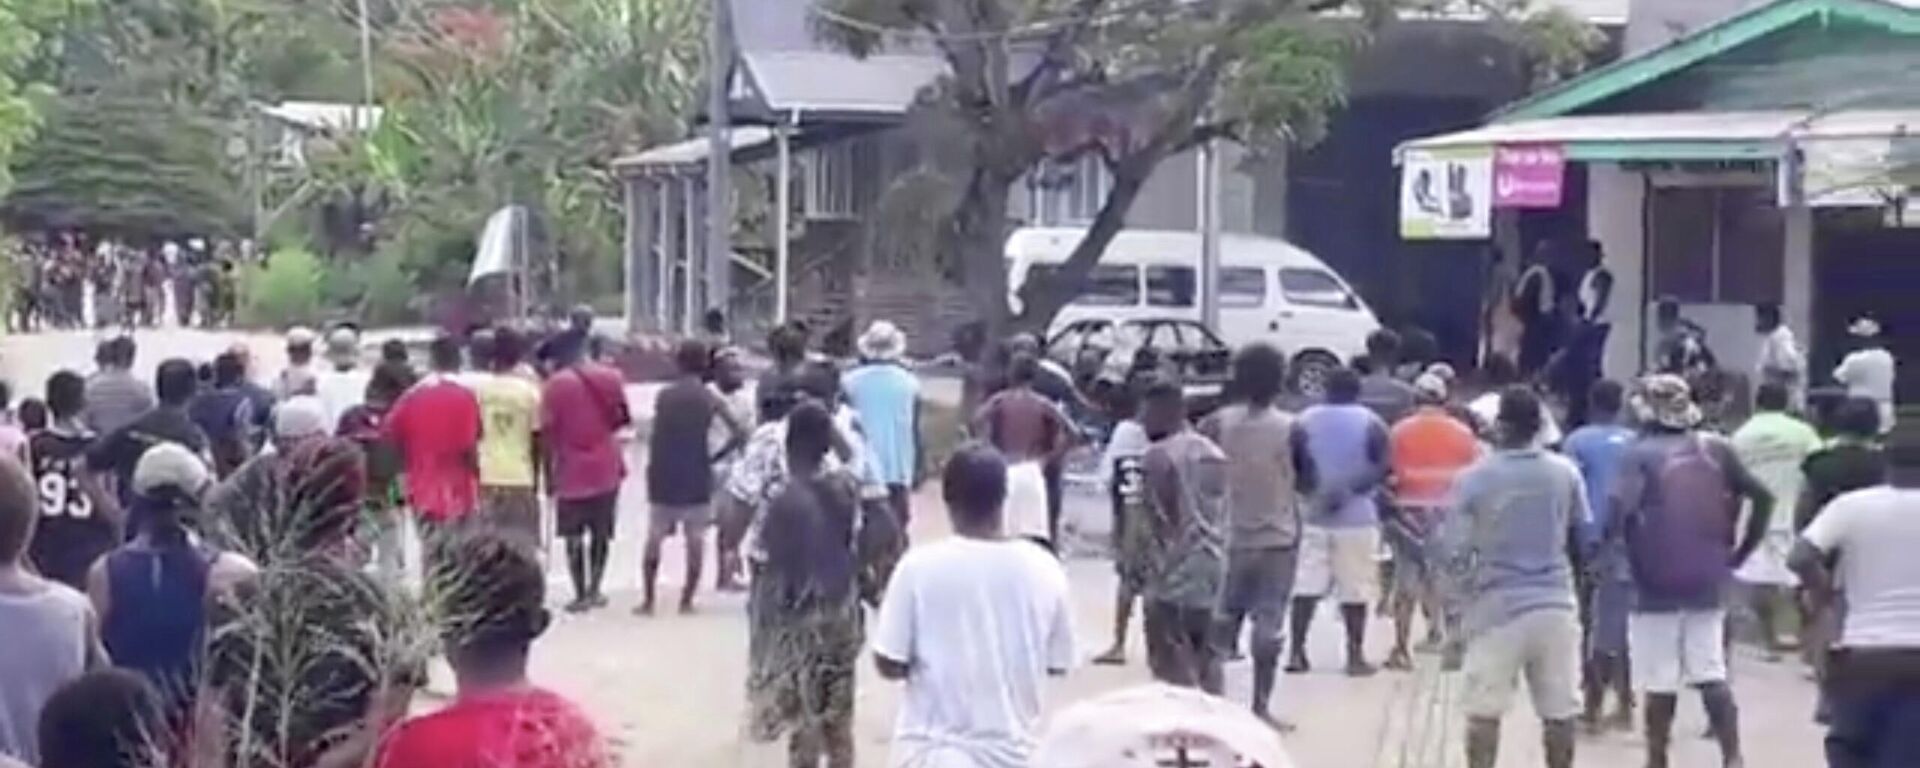 People gather near Naha Police station as Solomon Islanders defied a government-imposed lockdown and protested in the capital, in Honiara, Solomon Islands, November 25, 2021 - Sputnik International, 1920, 25.11.2021